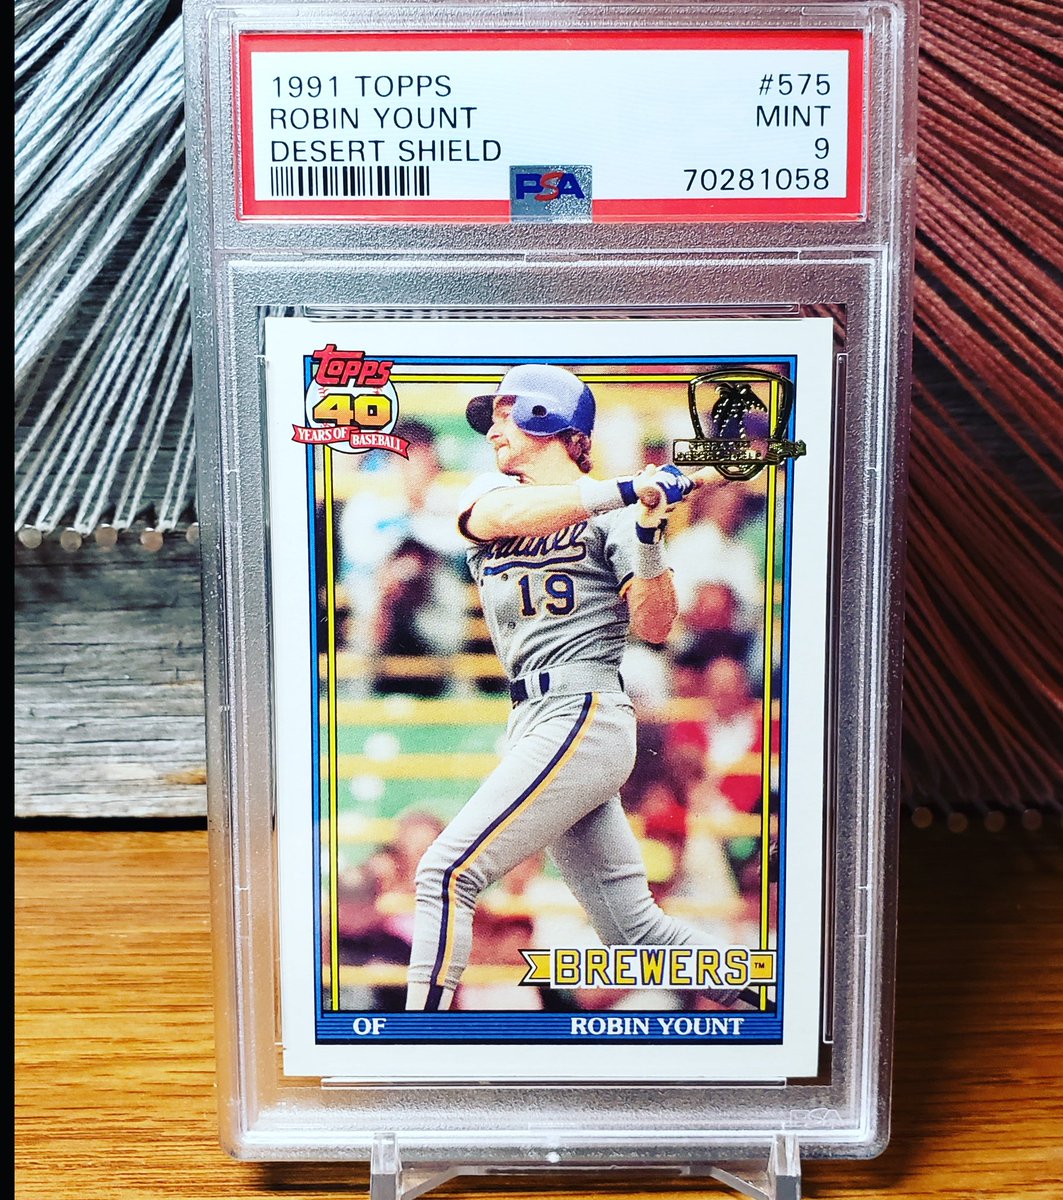 Cool Mailday - 1991 Topps Desert Shield Robin Yount PSA 9!! Total Pop graded is 244 for this release. I think the total # released is thought to be around 7K and distributed to soldiers fighting in Iraq. #robinyount #topps #desertshield #thehobby #psacard #baseballcards